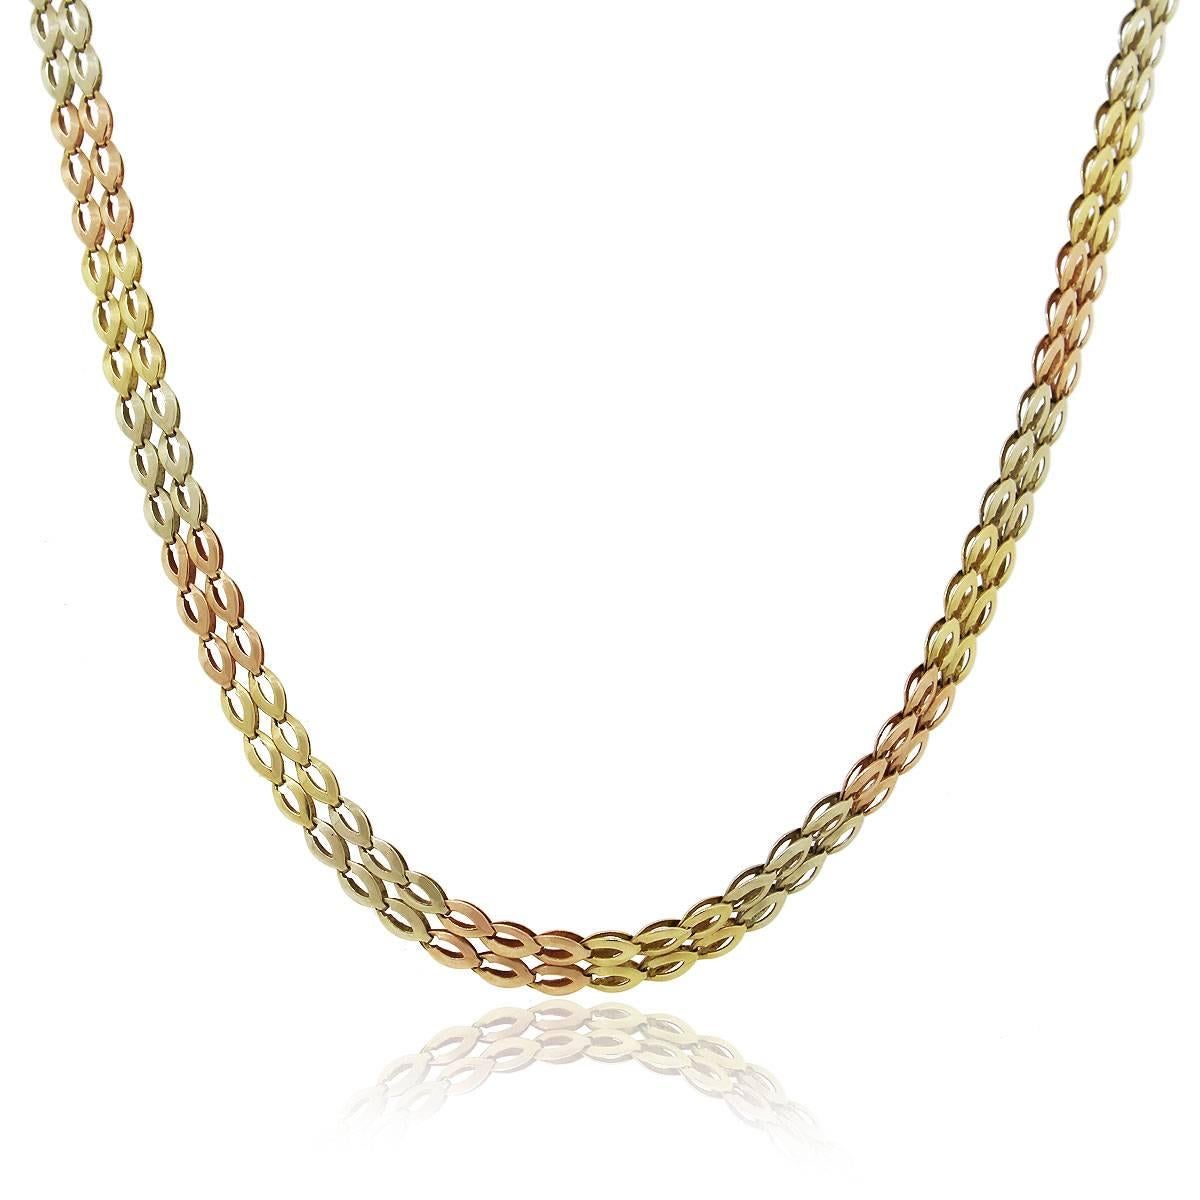 Style: 14k Tri Color Double Row Oval Link Necklace
Material: 14k Yellow, White and Rose Gold
Length: 16.5″
Clasp: Tongue in Box
Total Weight:  14g (8.9dwt)
SKU: G7267